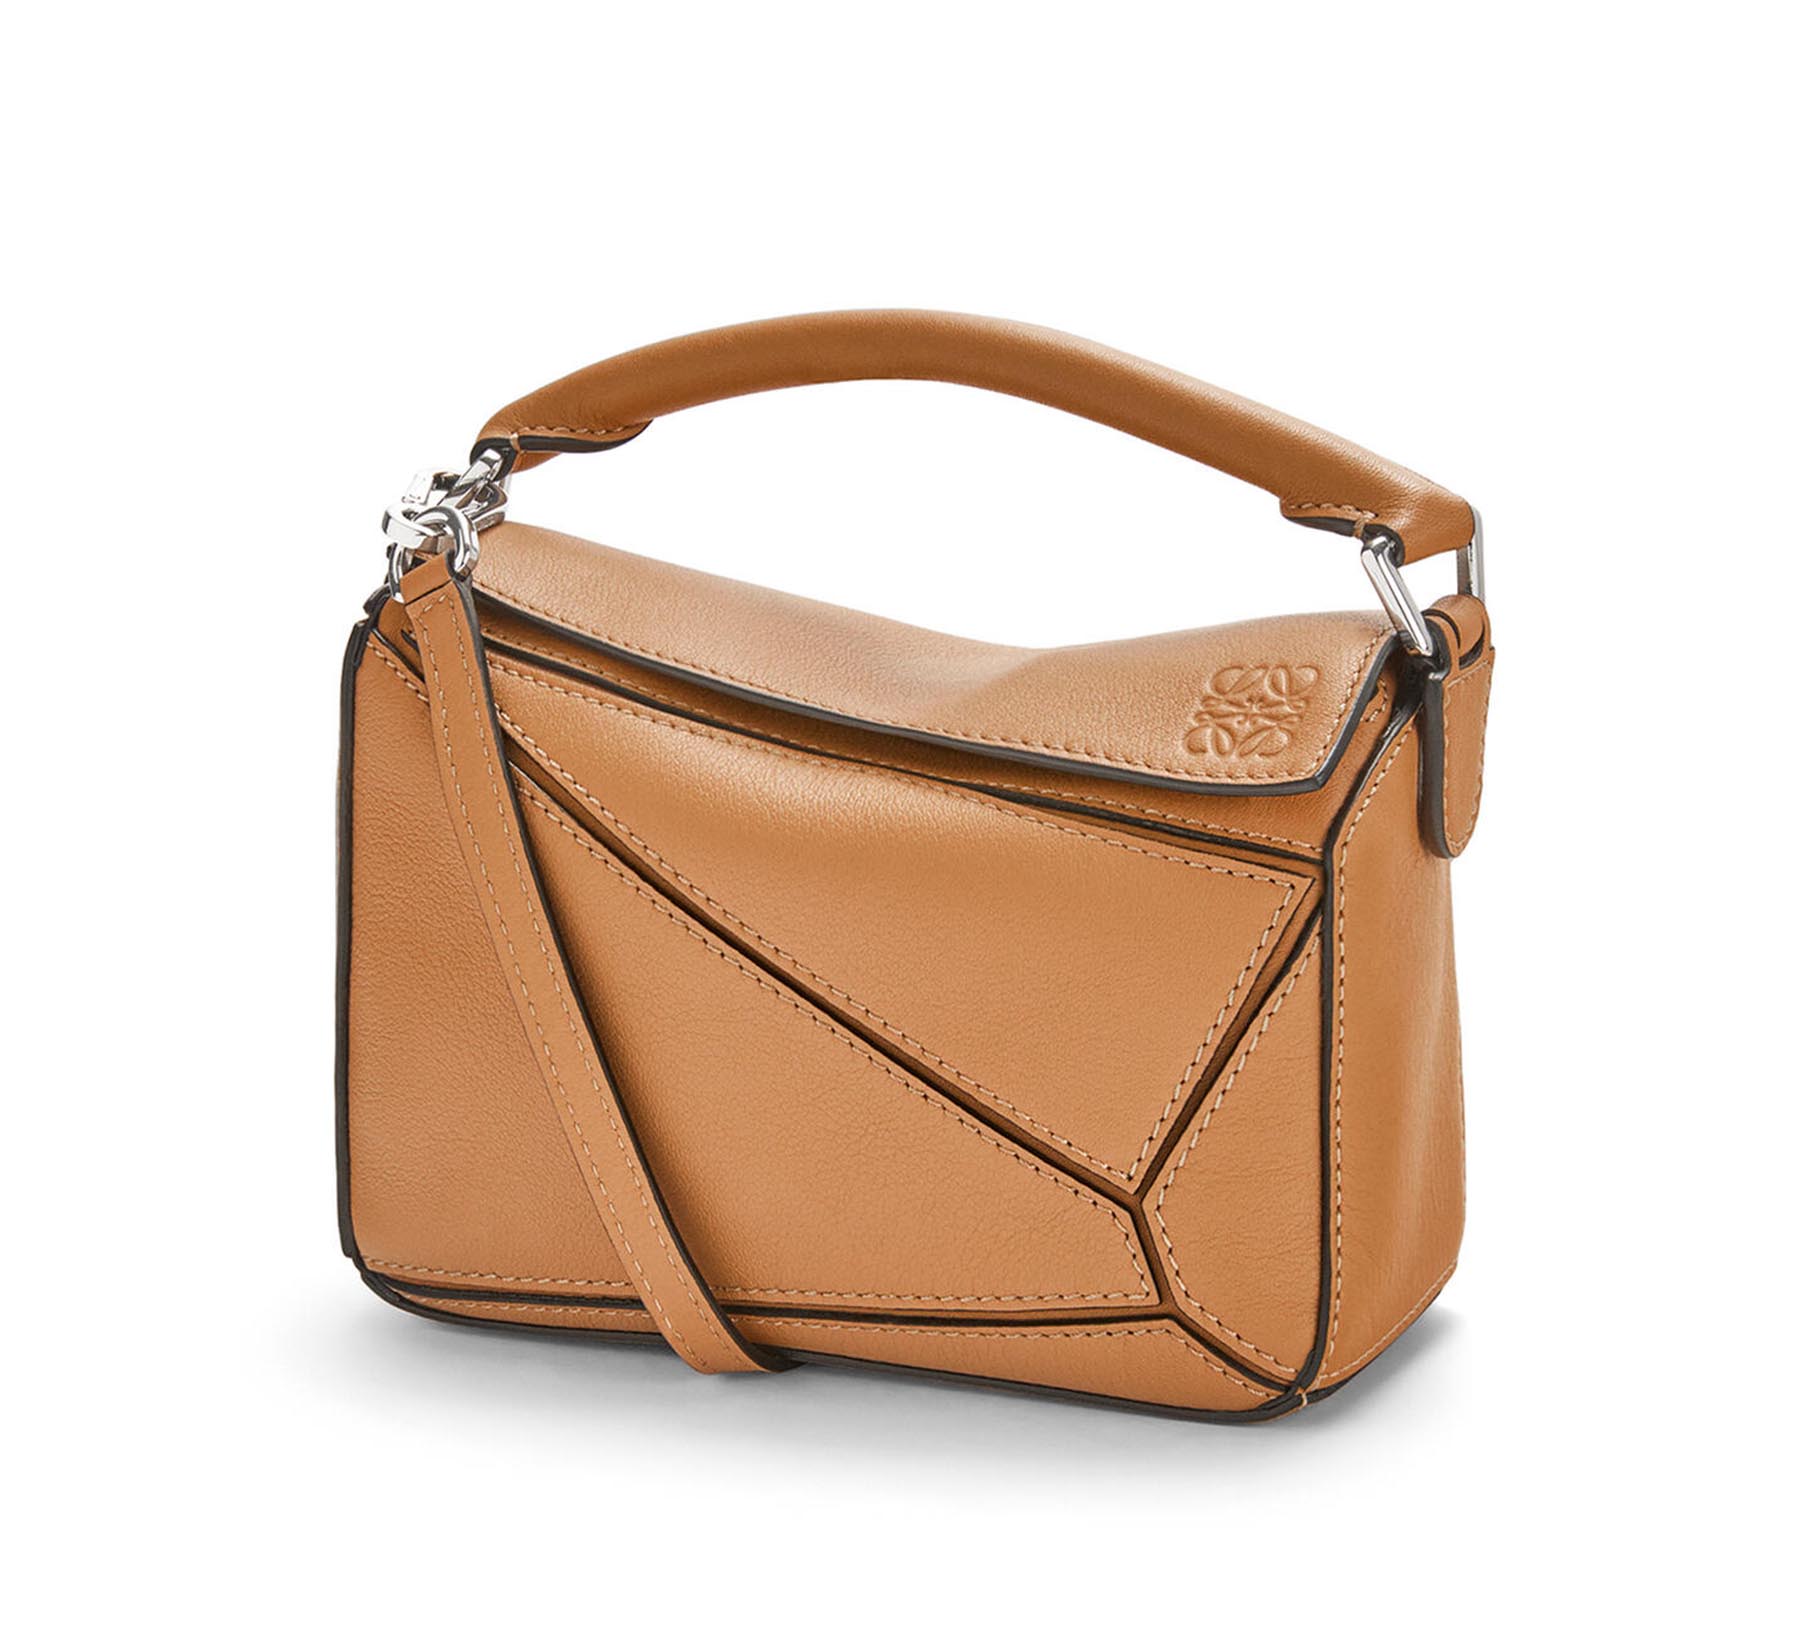 Meet the LOEWE BALLOON BAG: Design and Function, PROS and CONS